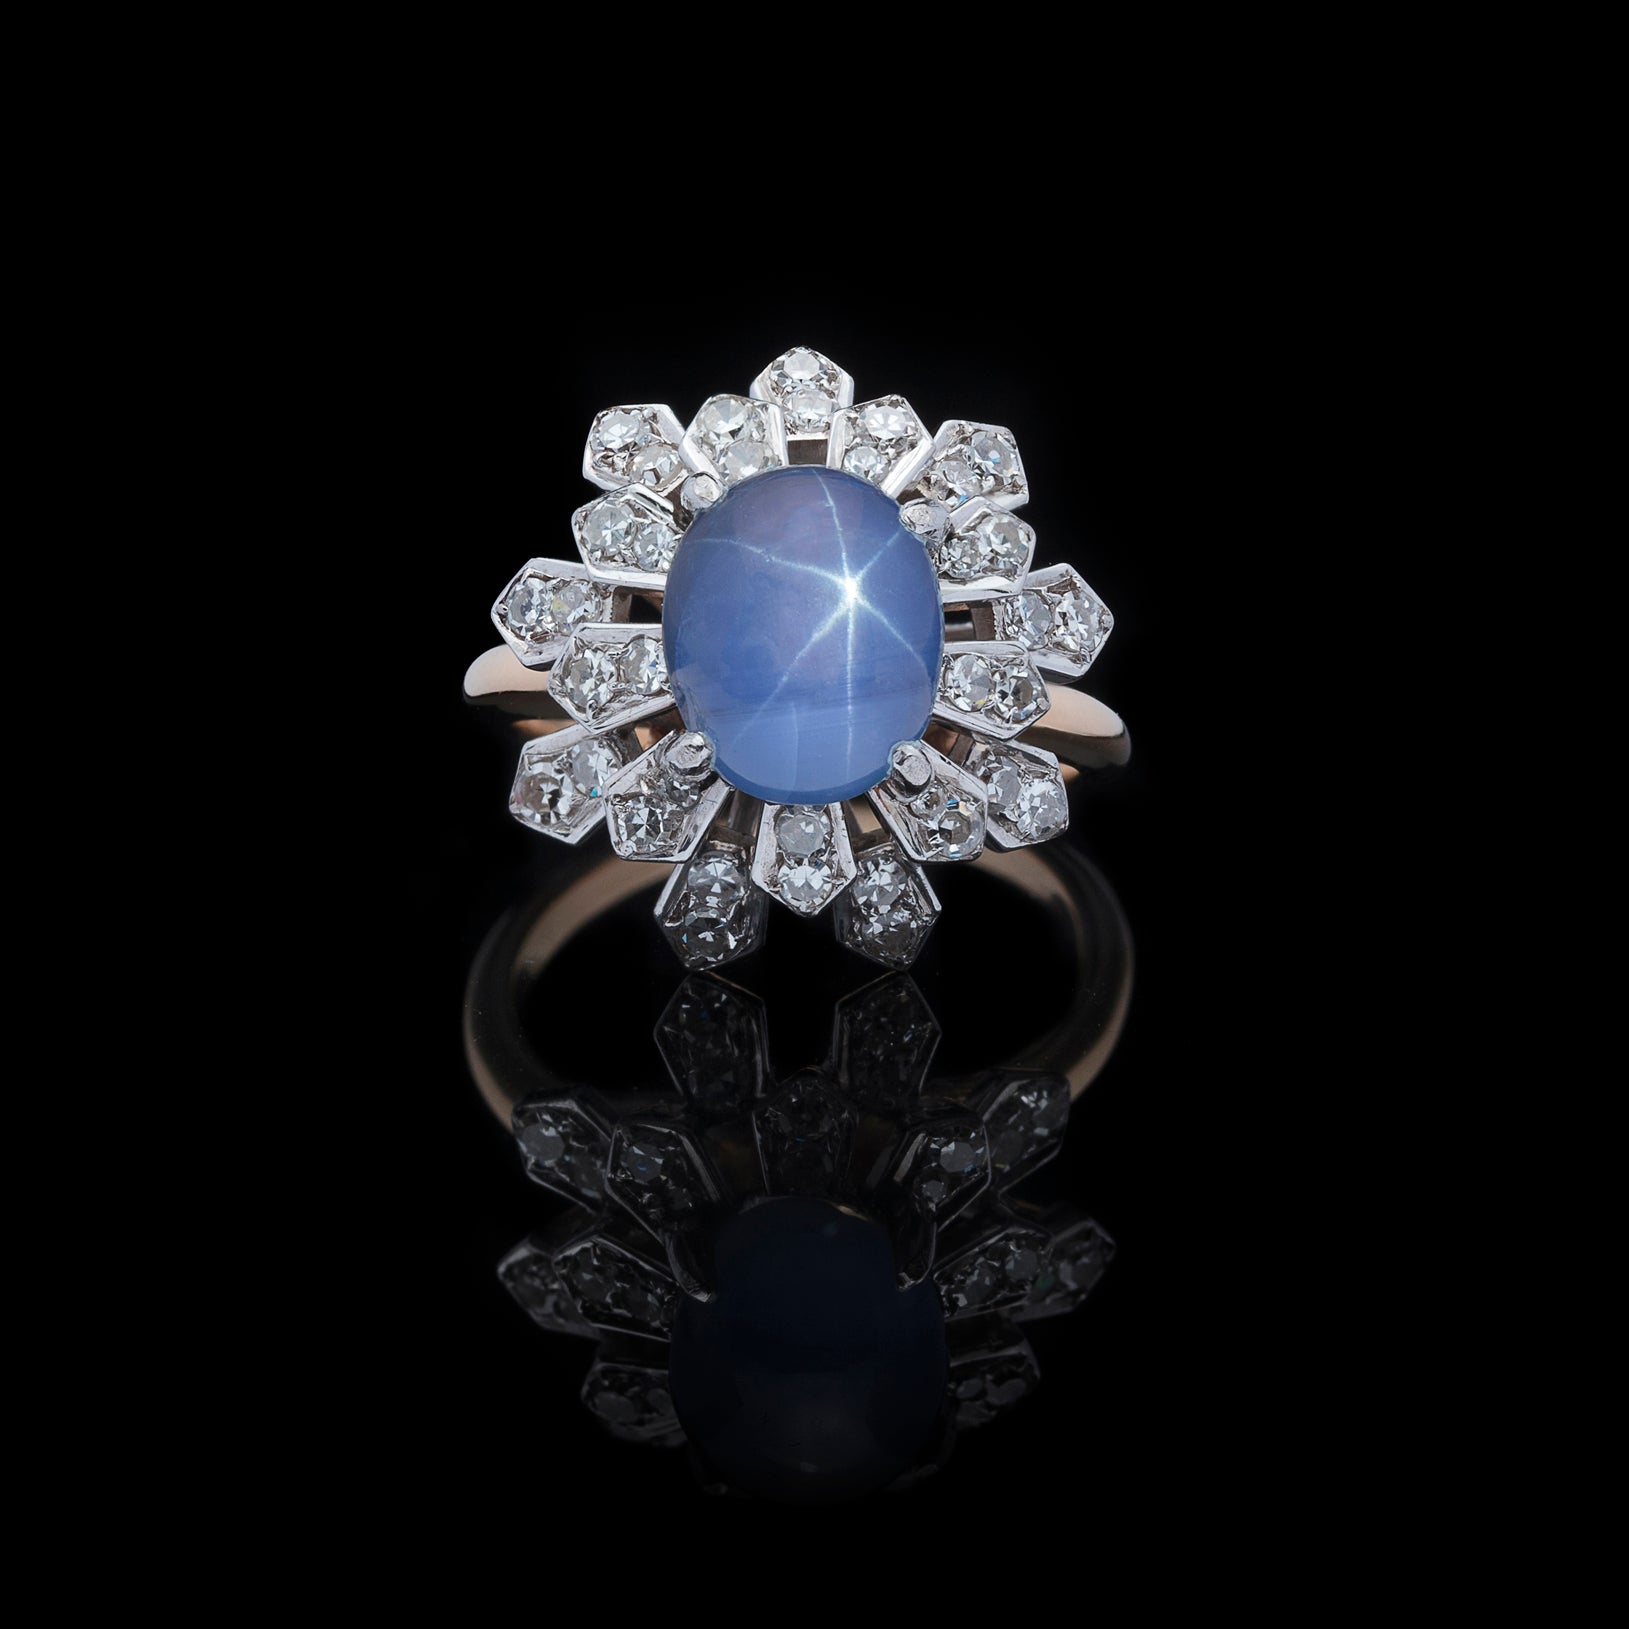 Buy CEYLONMINE-5.25 Ratti Natural Certified Blue Star Sapphire Neelam Ring  for Men and Women Online - Get 63% Off